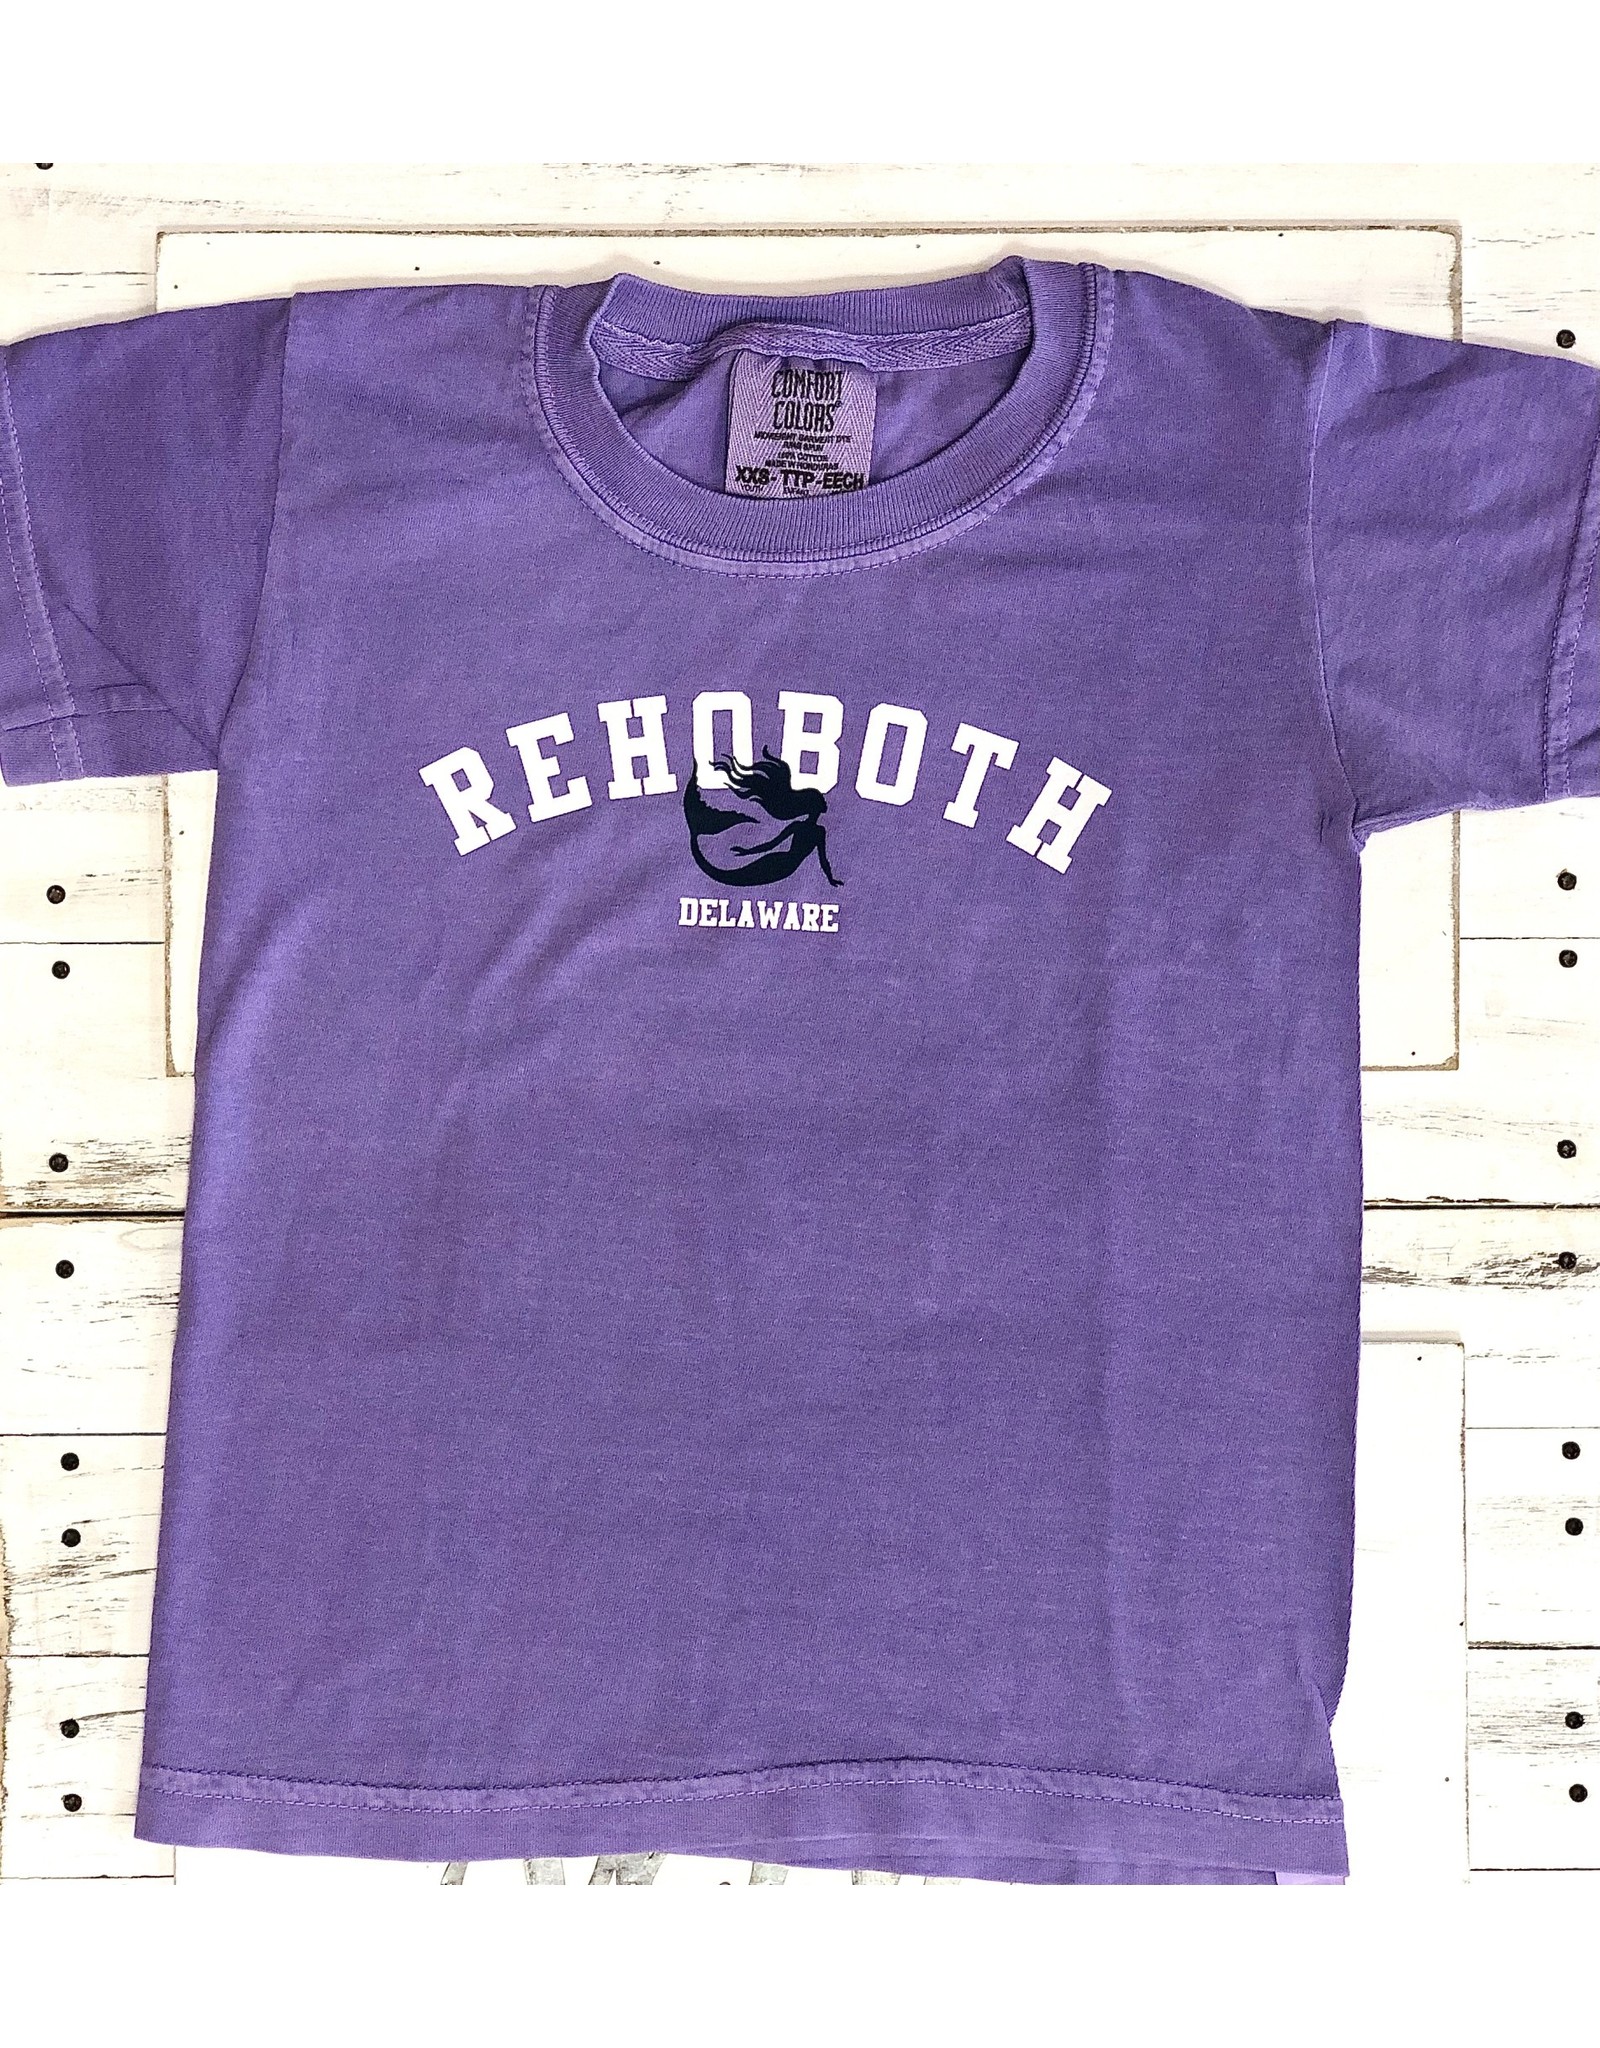 REHOBOTH LIFESTYLE YOUTH CLASSIC BEACH SS TEE VIOLET MERMAID